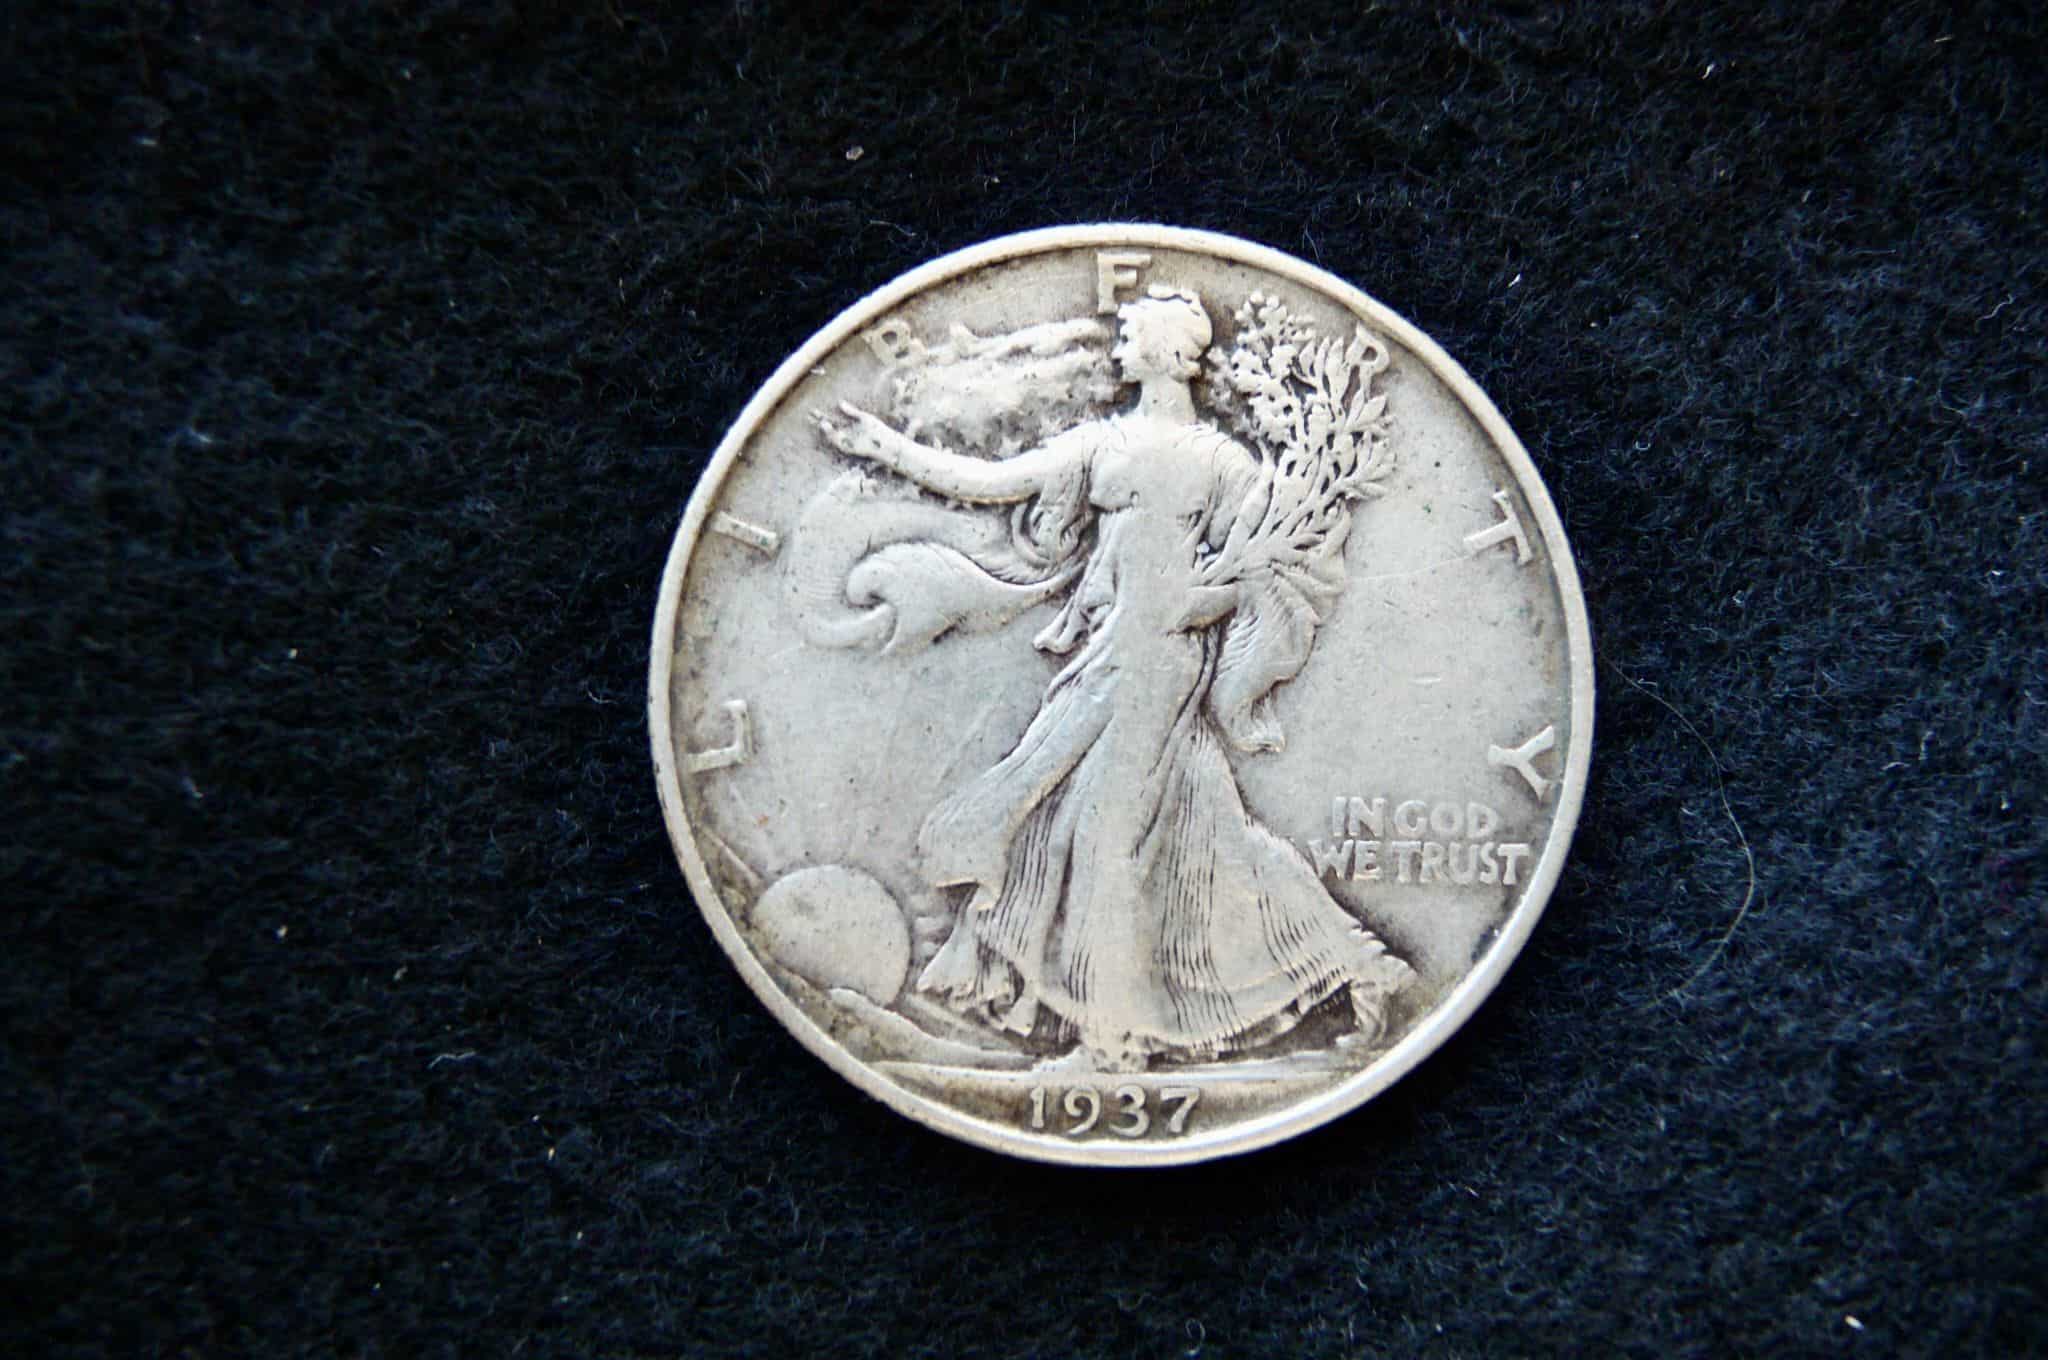 Features of the 1937 Half Dollar